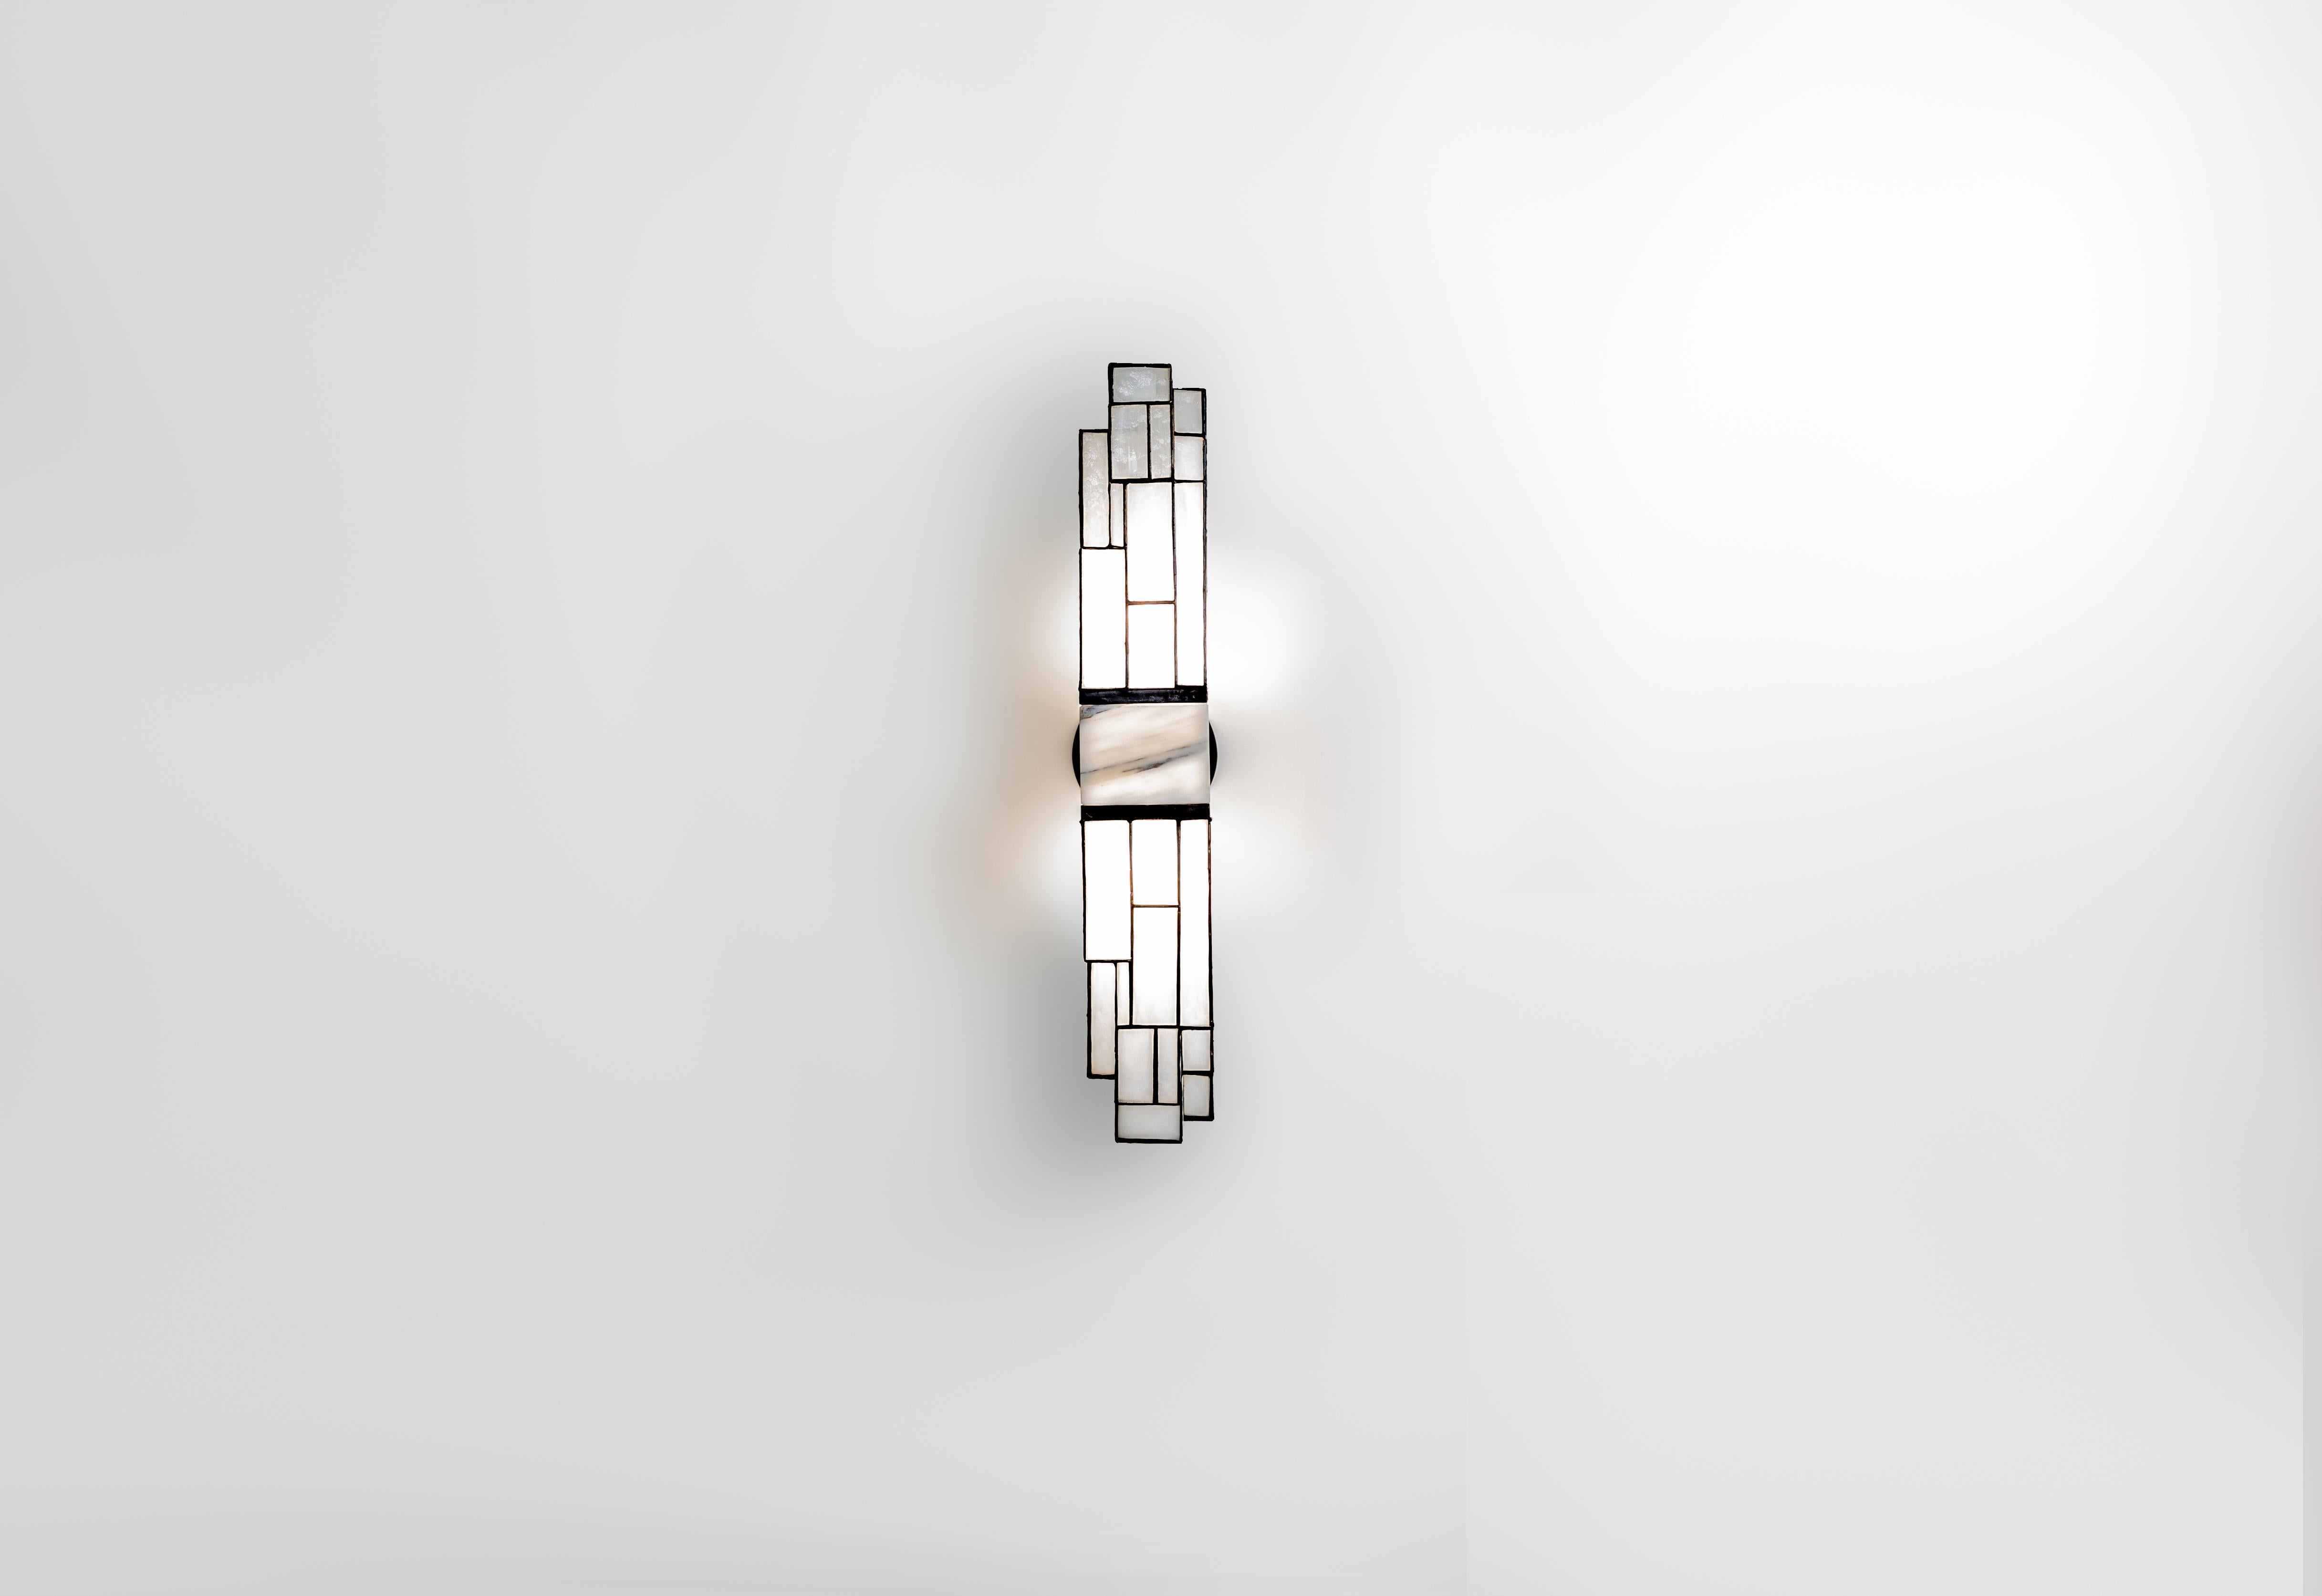 Kalin Asenov designs and fabricates lighting in Savannah, GA. Asenov works with a team of artisans and manufacturers to prototype, and build all pieces in his studio.

Asenov’s designs are driven by narrative; every object is an expression of a